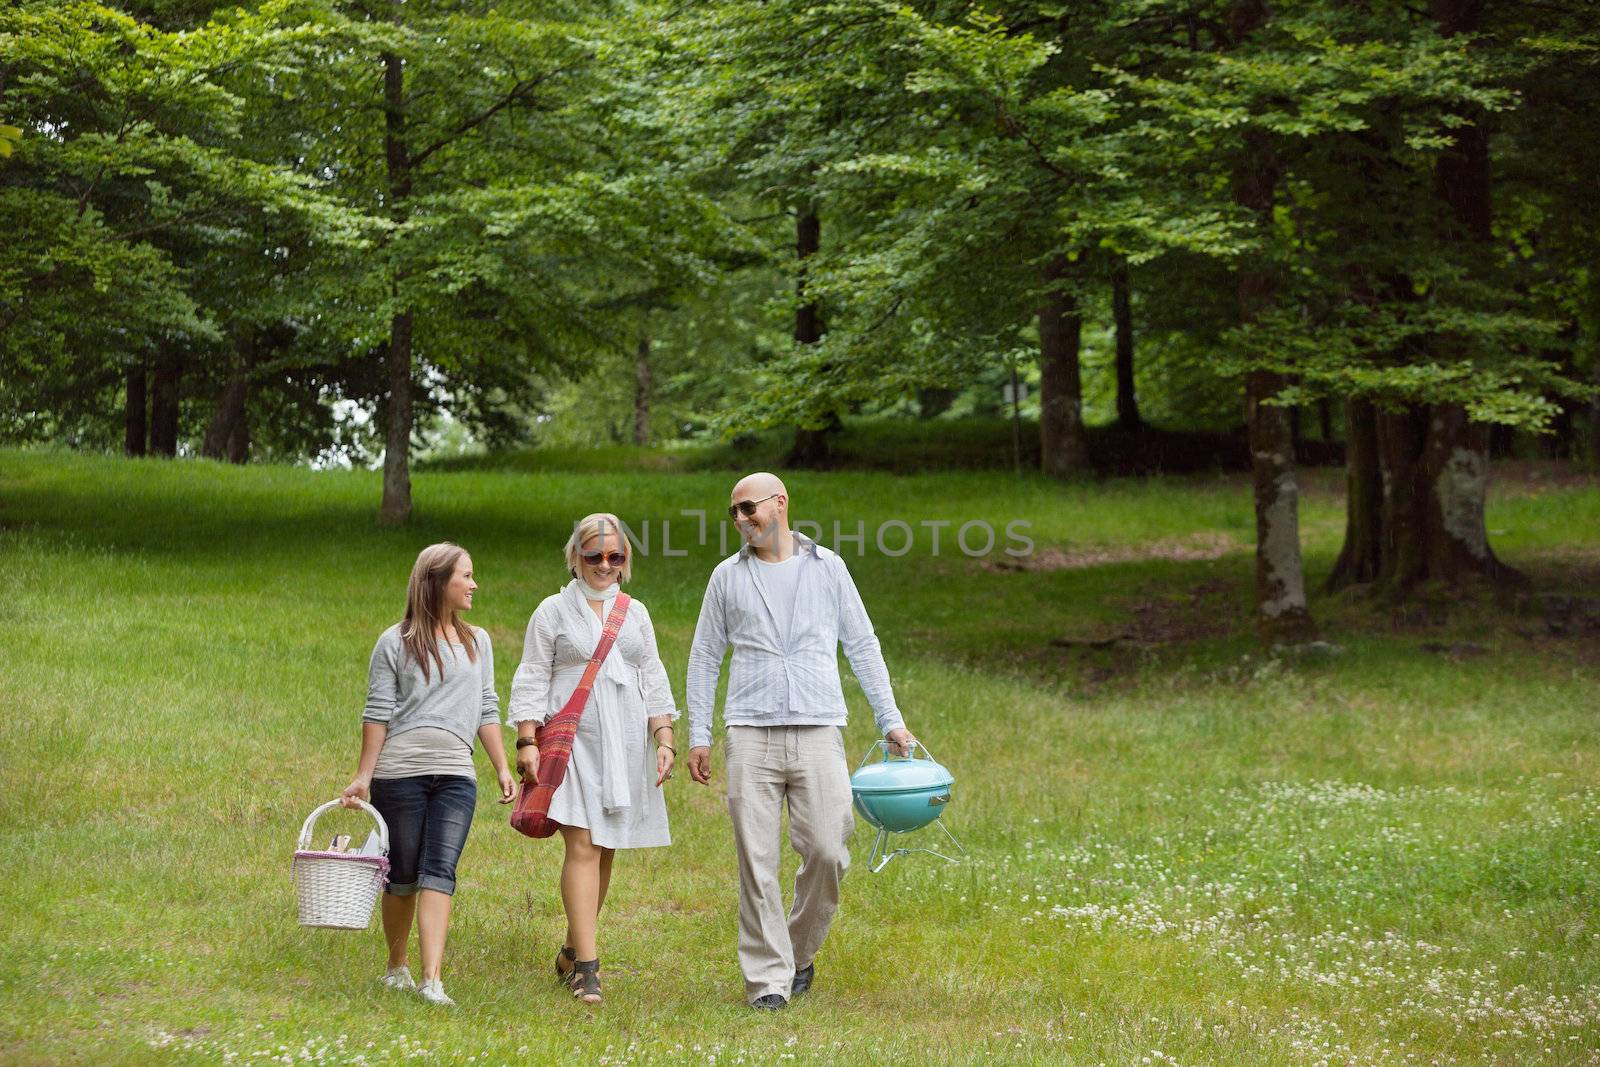 Full length of friends iin casual wear out for a picnic in a forest park